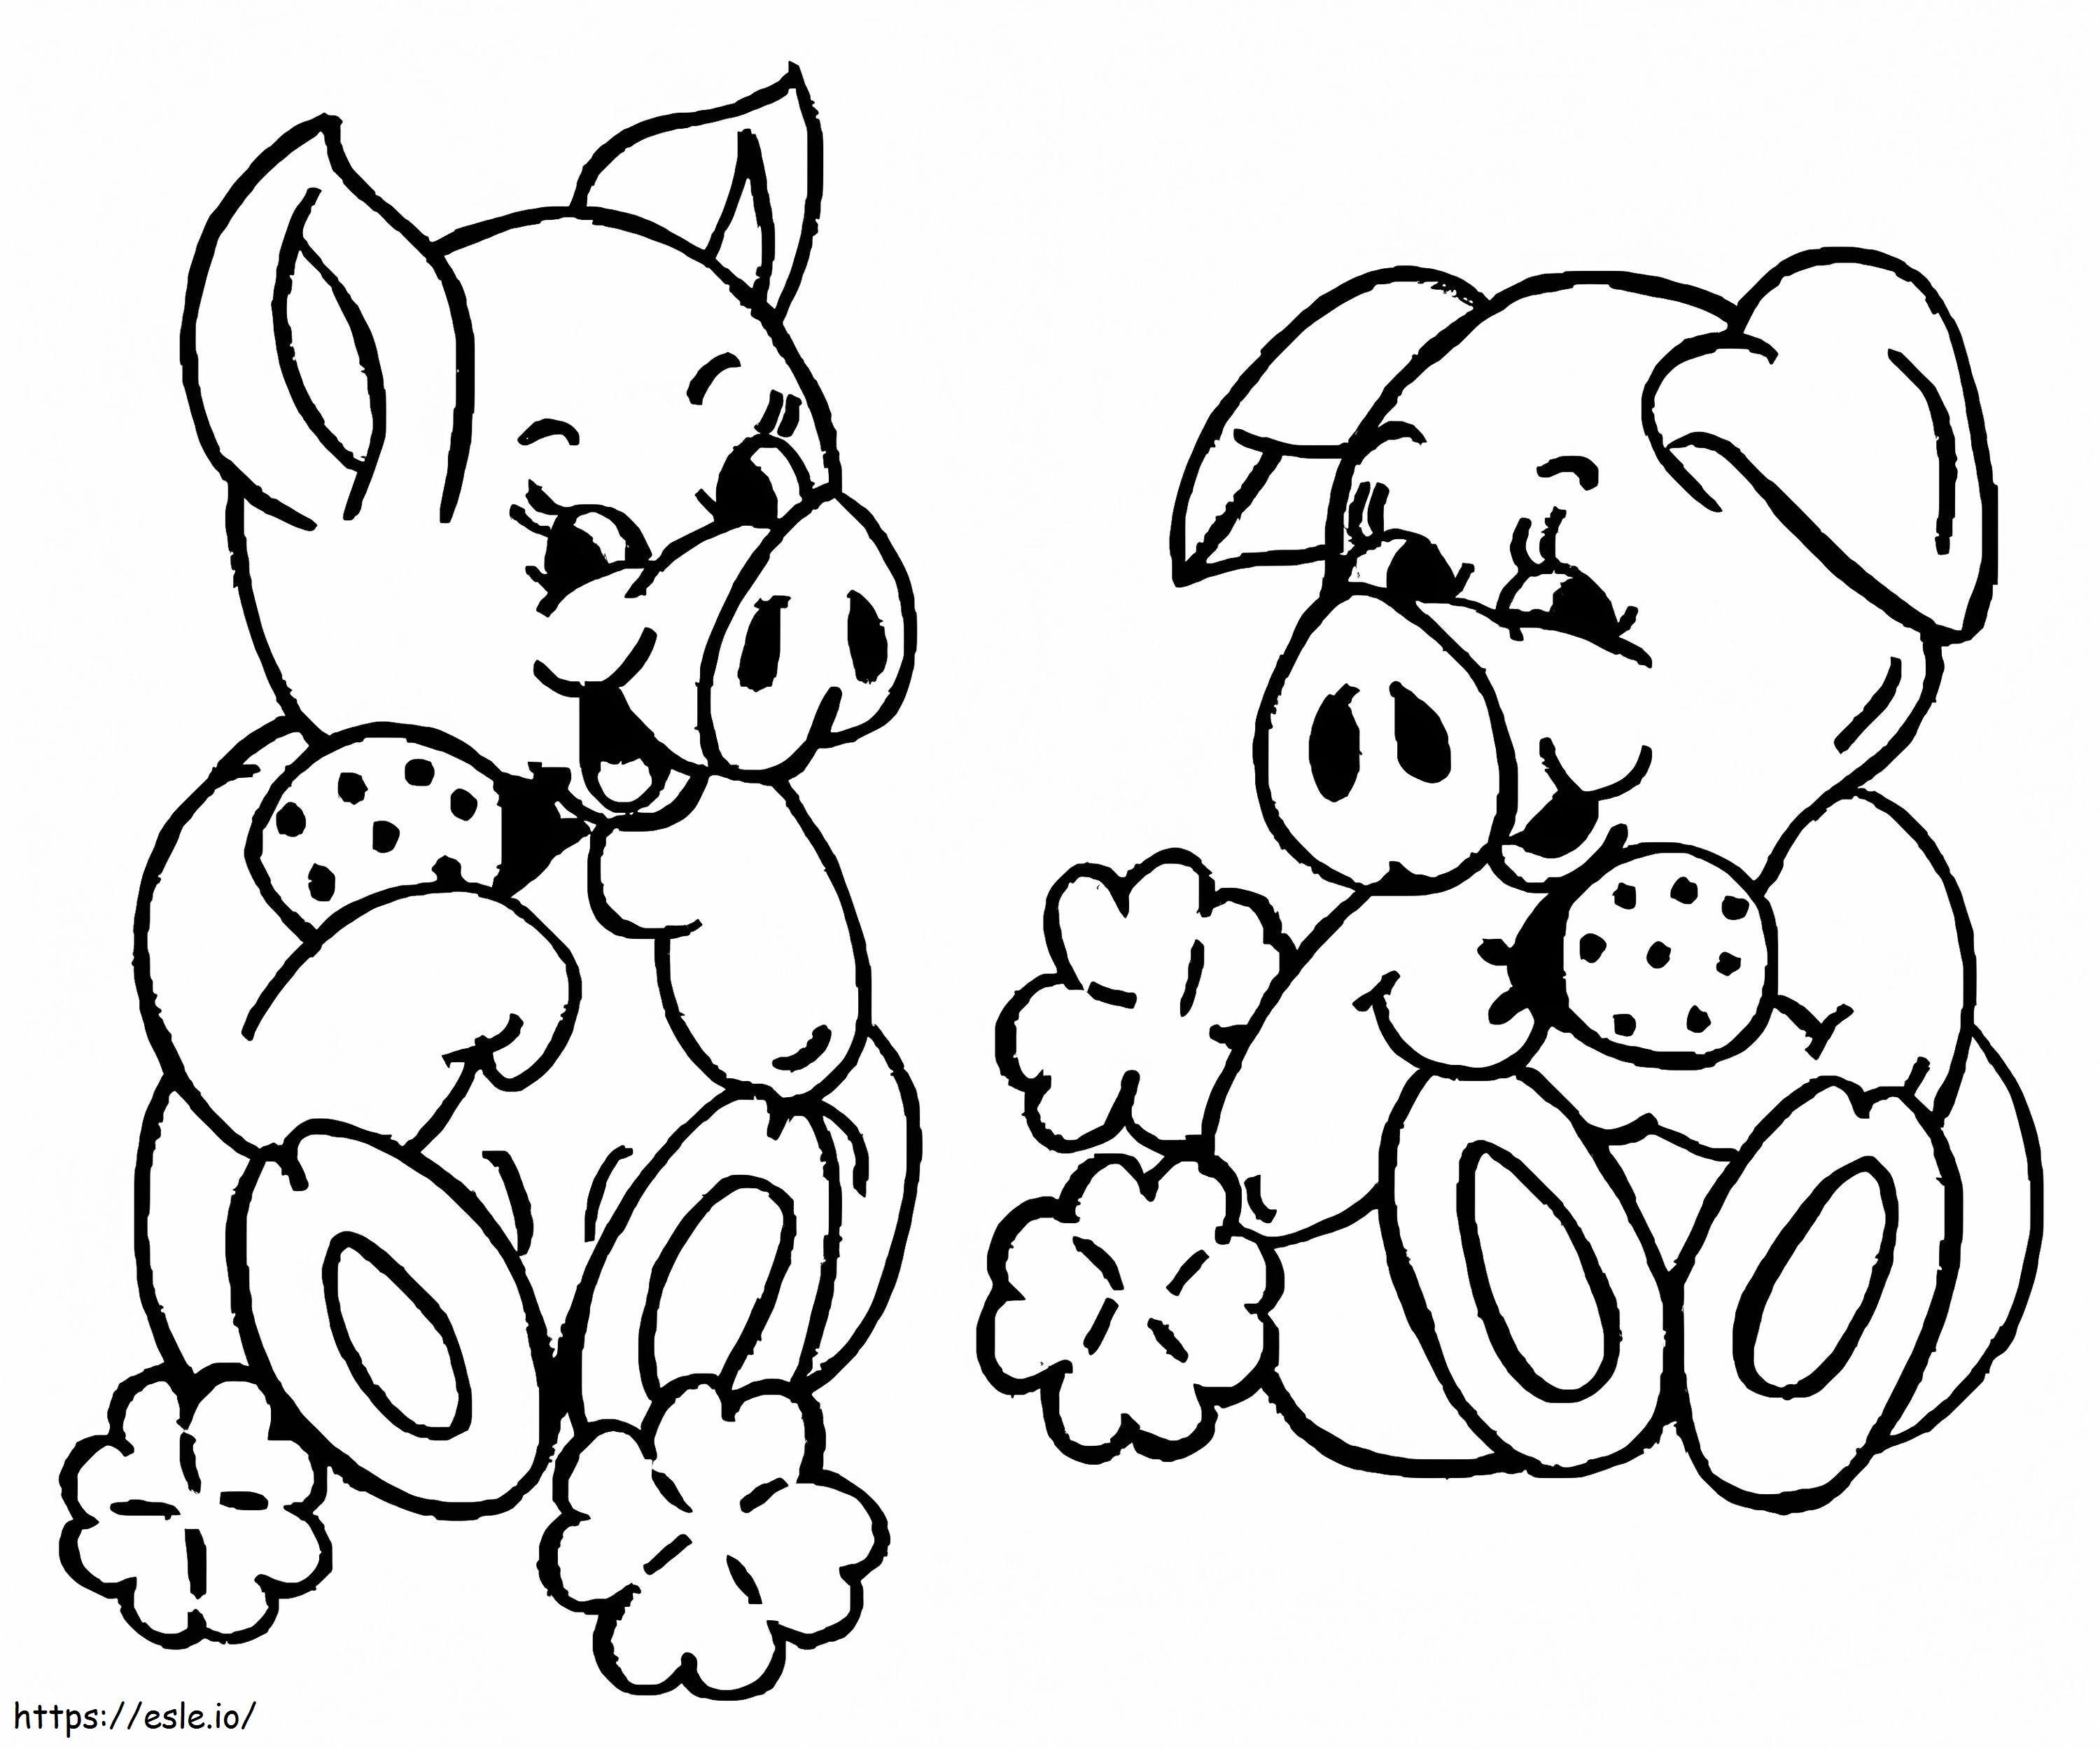 Two Cute Pigs coloring page